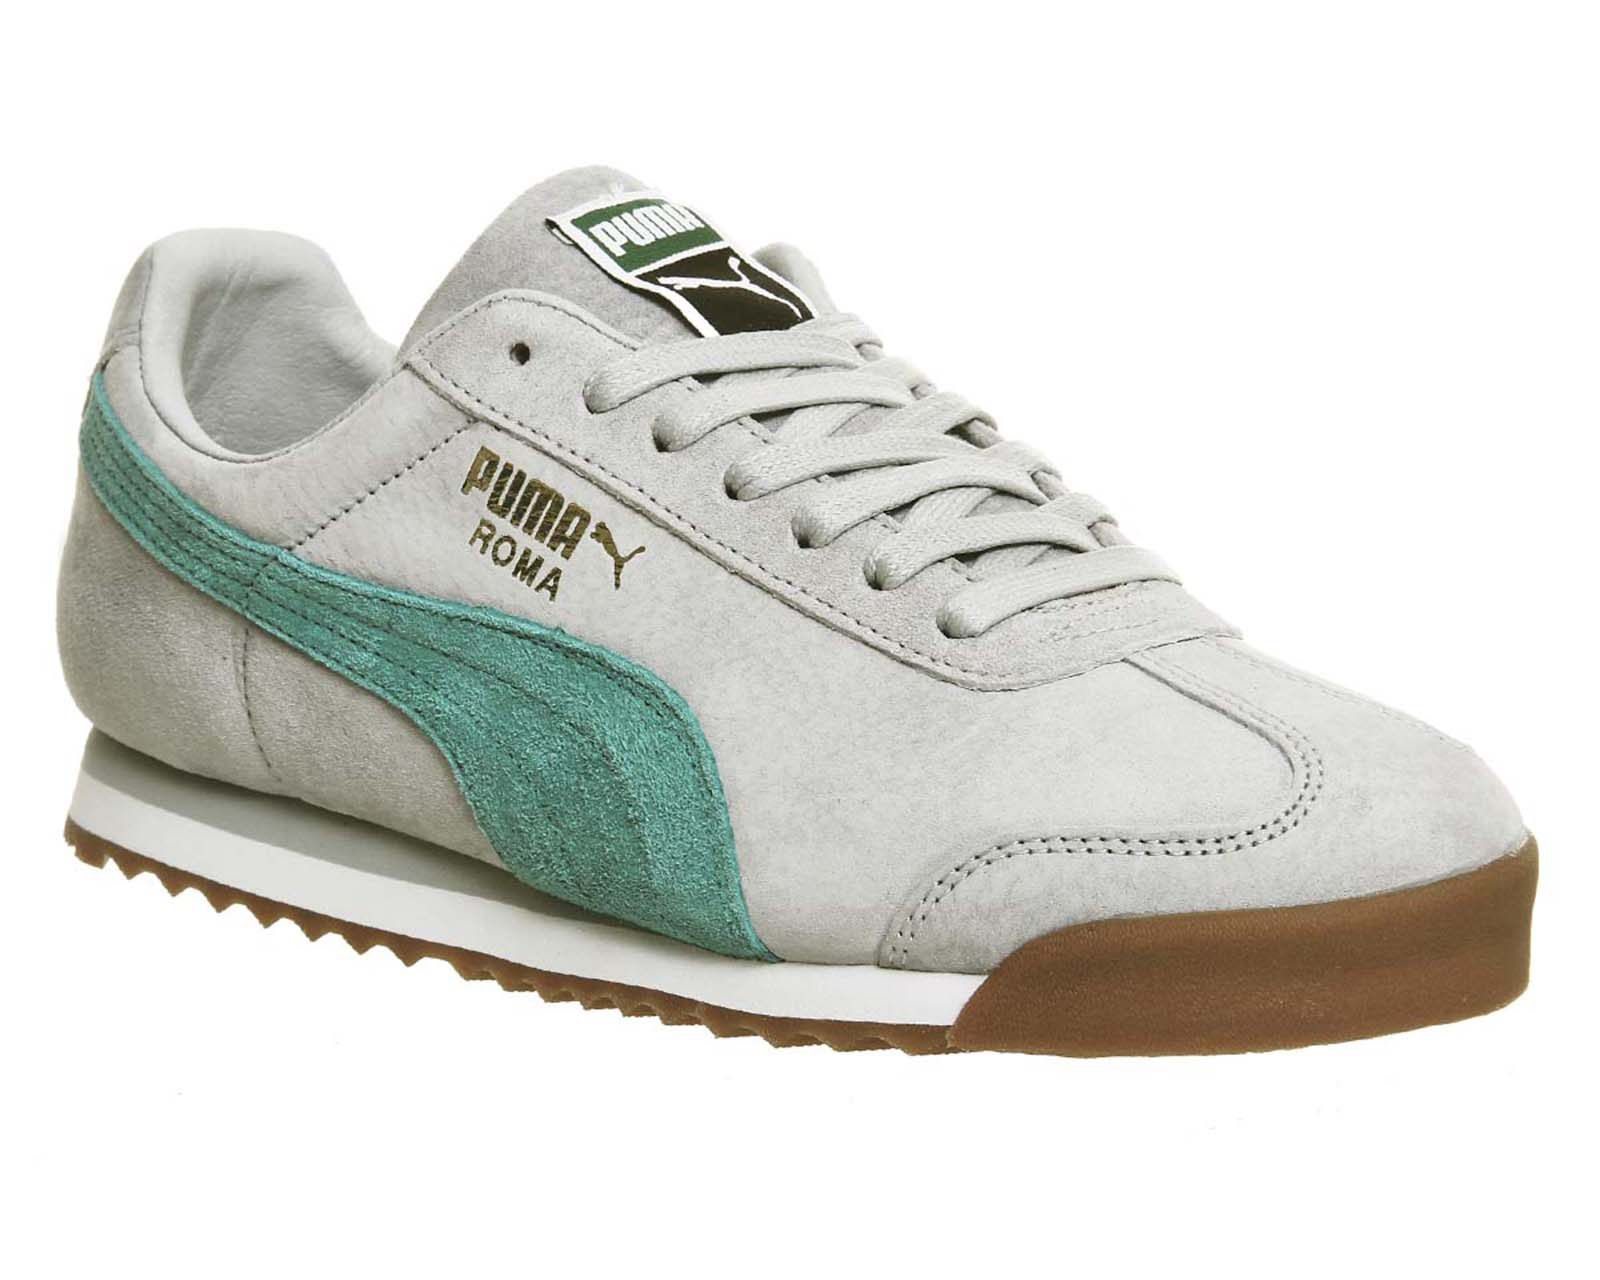 Puma Roma Grey Spectre Suede - His trainers